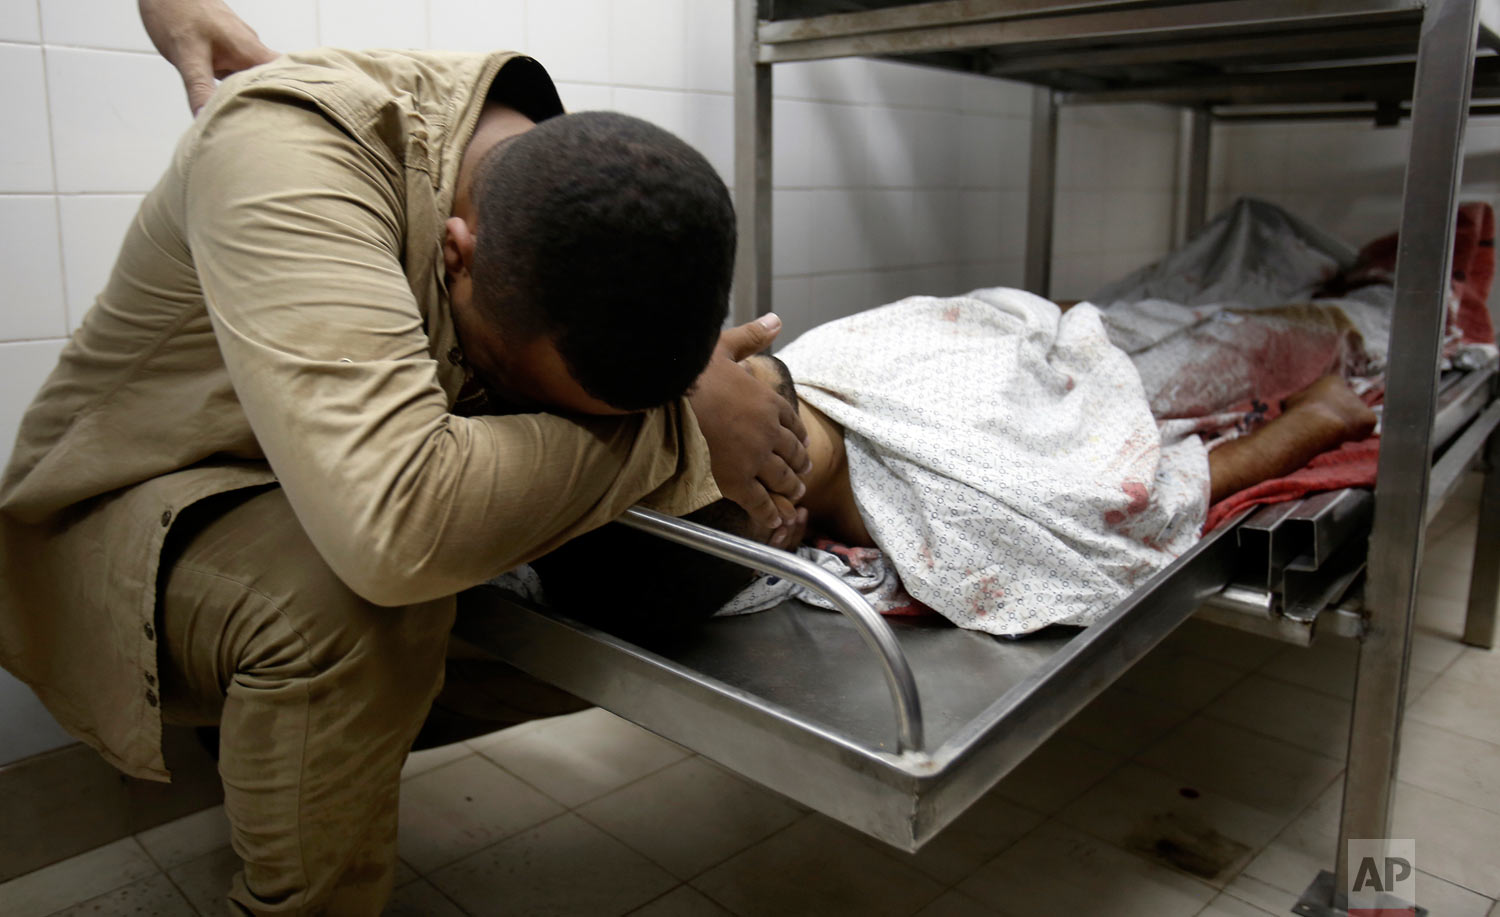  A relative mourns over the body of Abdullah al-Qutati, 26, at the morgue of the European hospital east of Khan Younis, southern Gaza Strip, east of Khan Younis, Friday, Aug. 10, 2018. Two Palestinians, including a paramedic, were shot and killed by Israeli fire at a Hamas-led protest along the border, Gaza's Health Ministry said. (AP Photo/Adel Hana) 